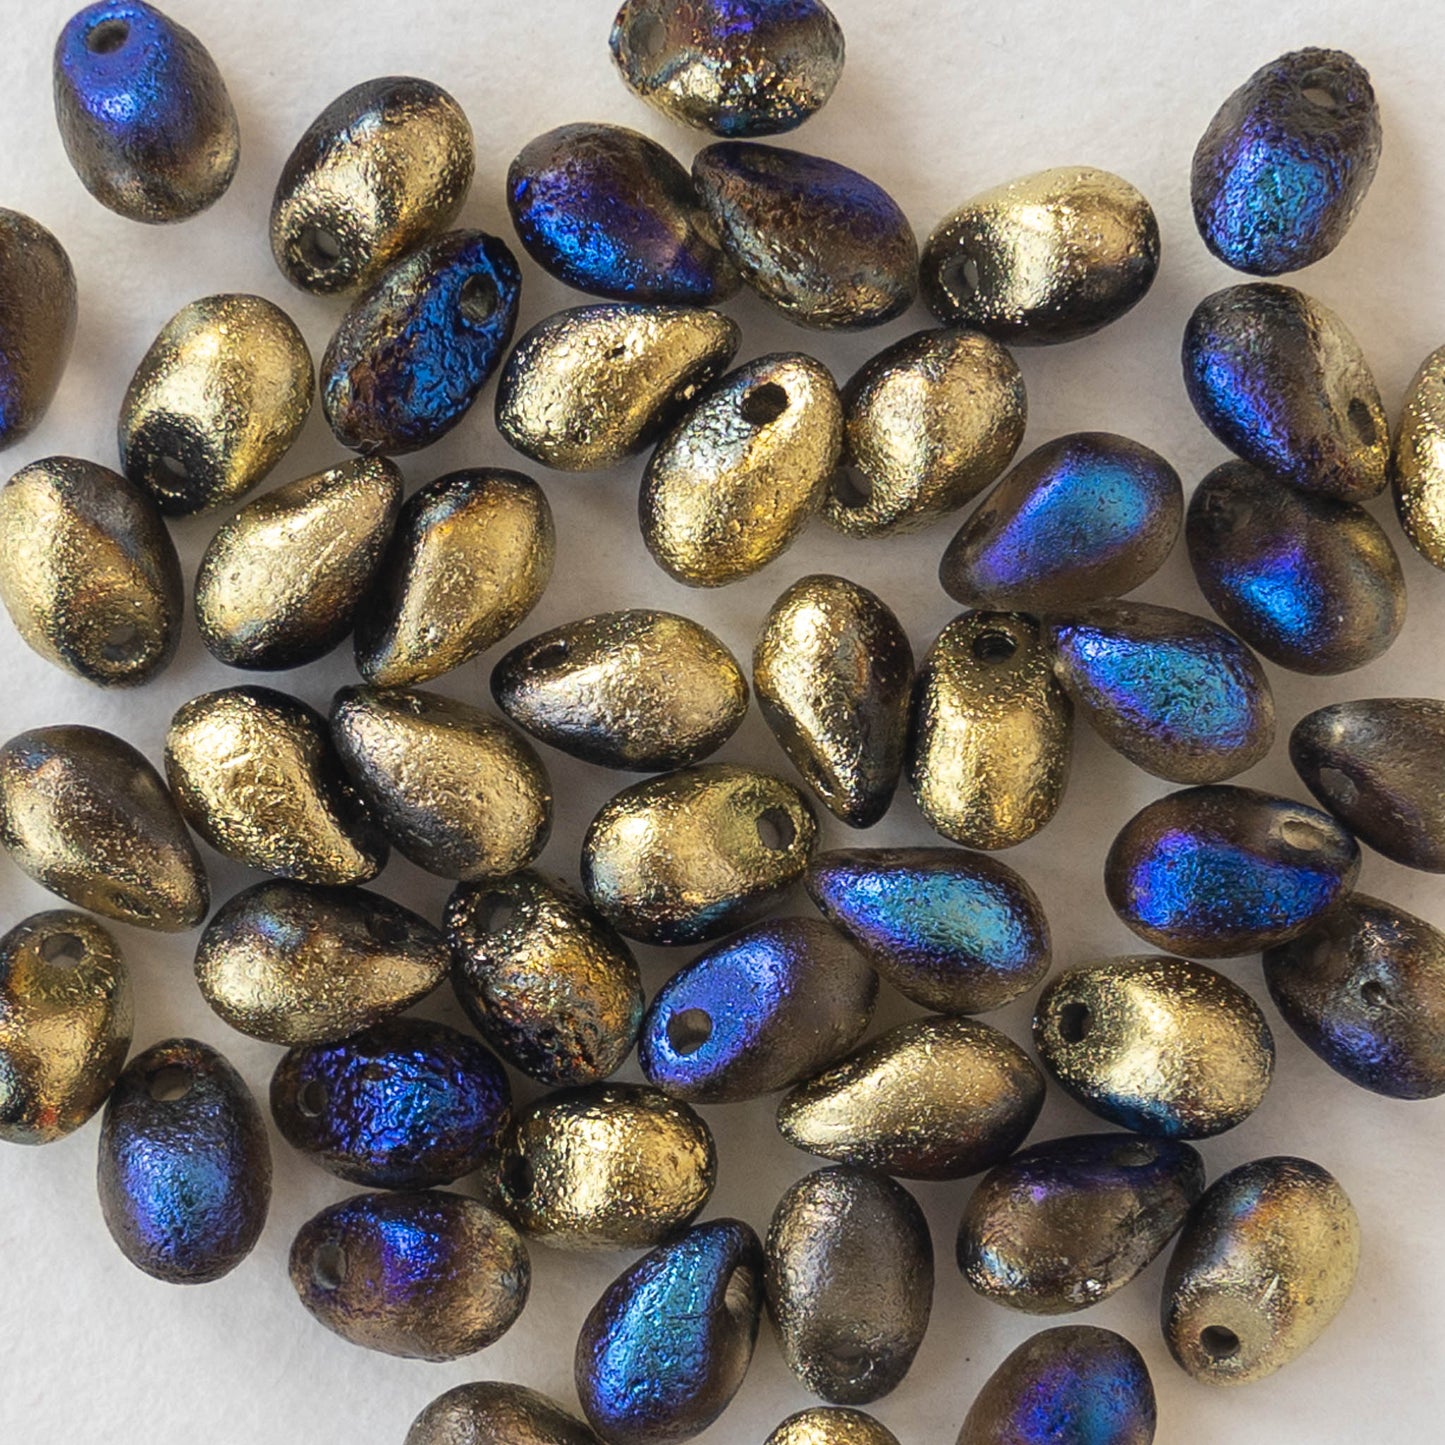 4x6mm Glass Teardrop Beads -  Blue and Gold Etched - 50 Beads